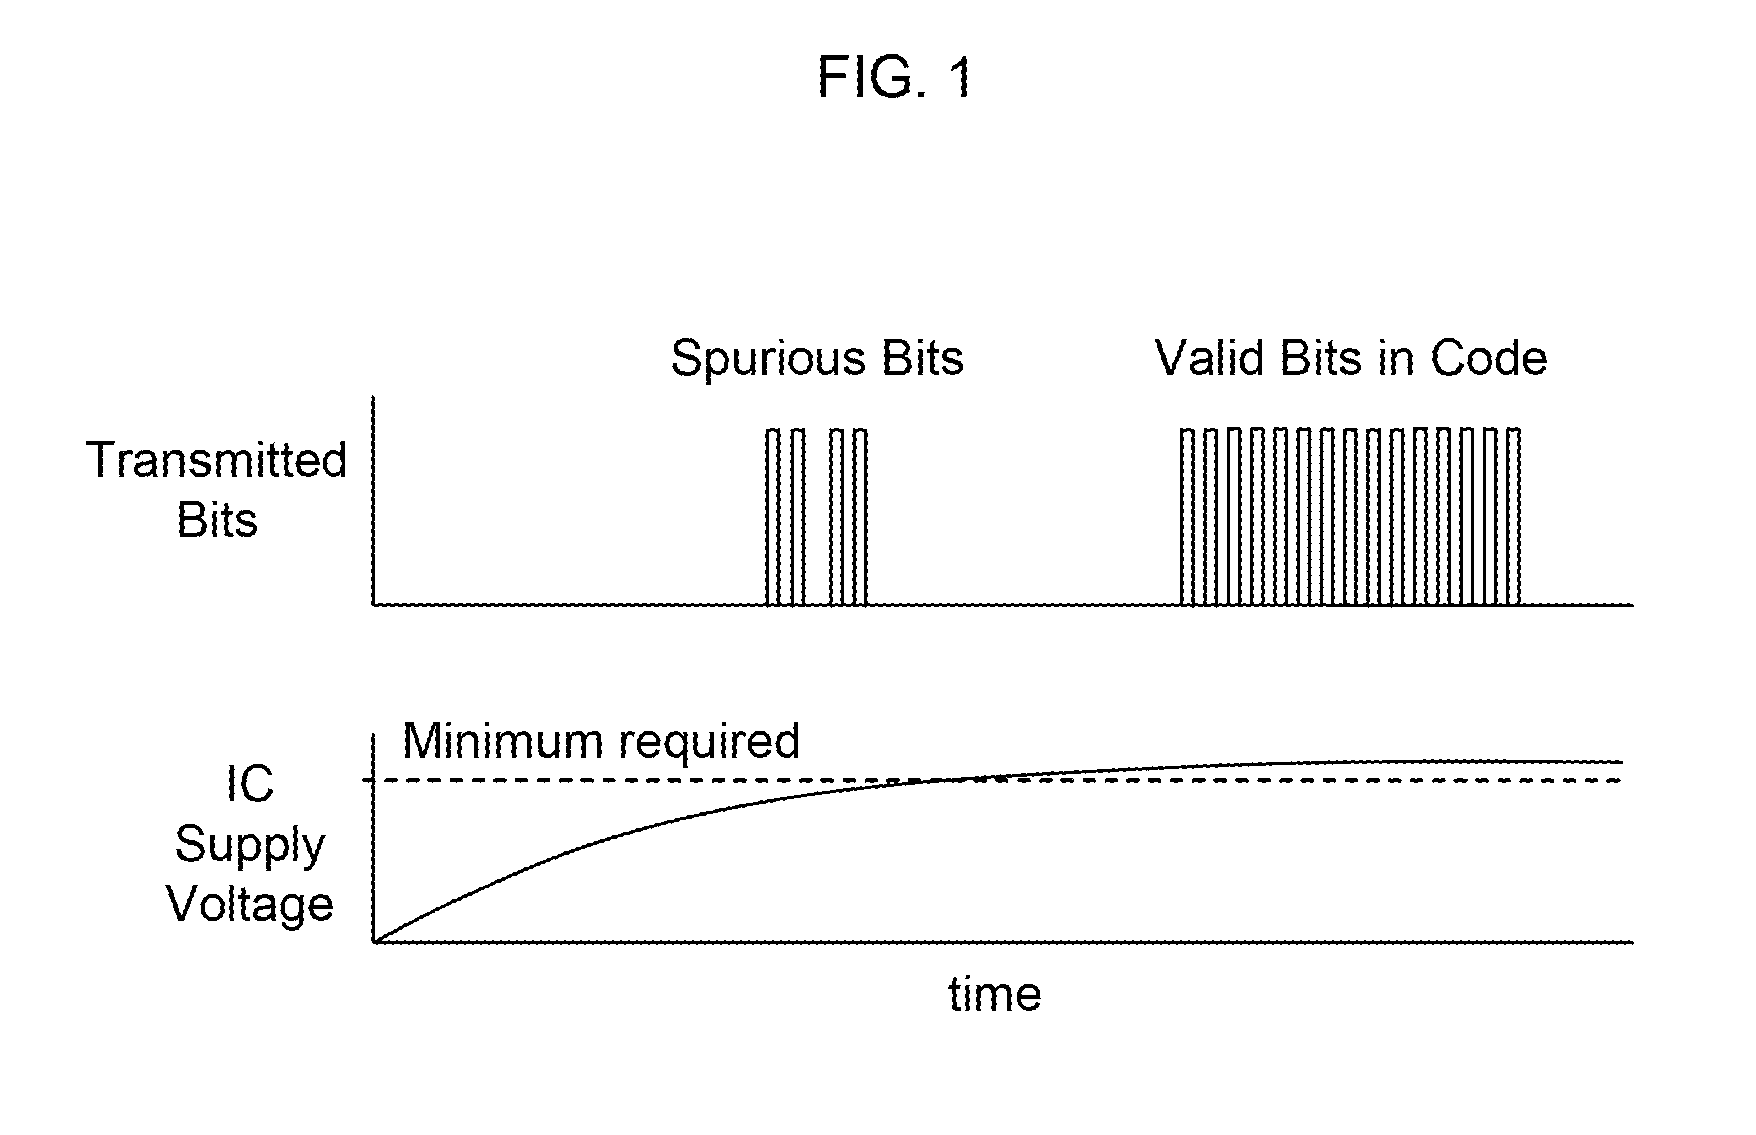 Methods and Systems for Validating Code from a Wireless Device